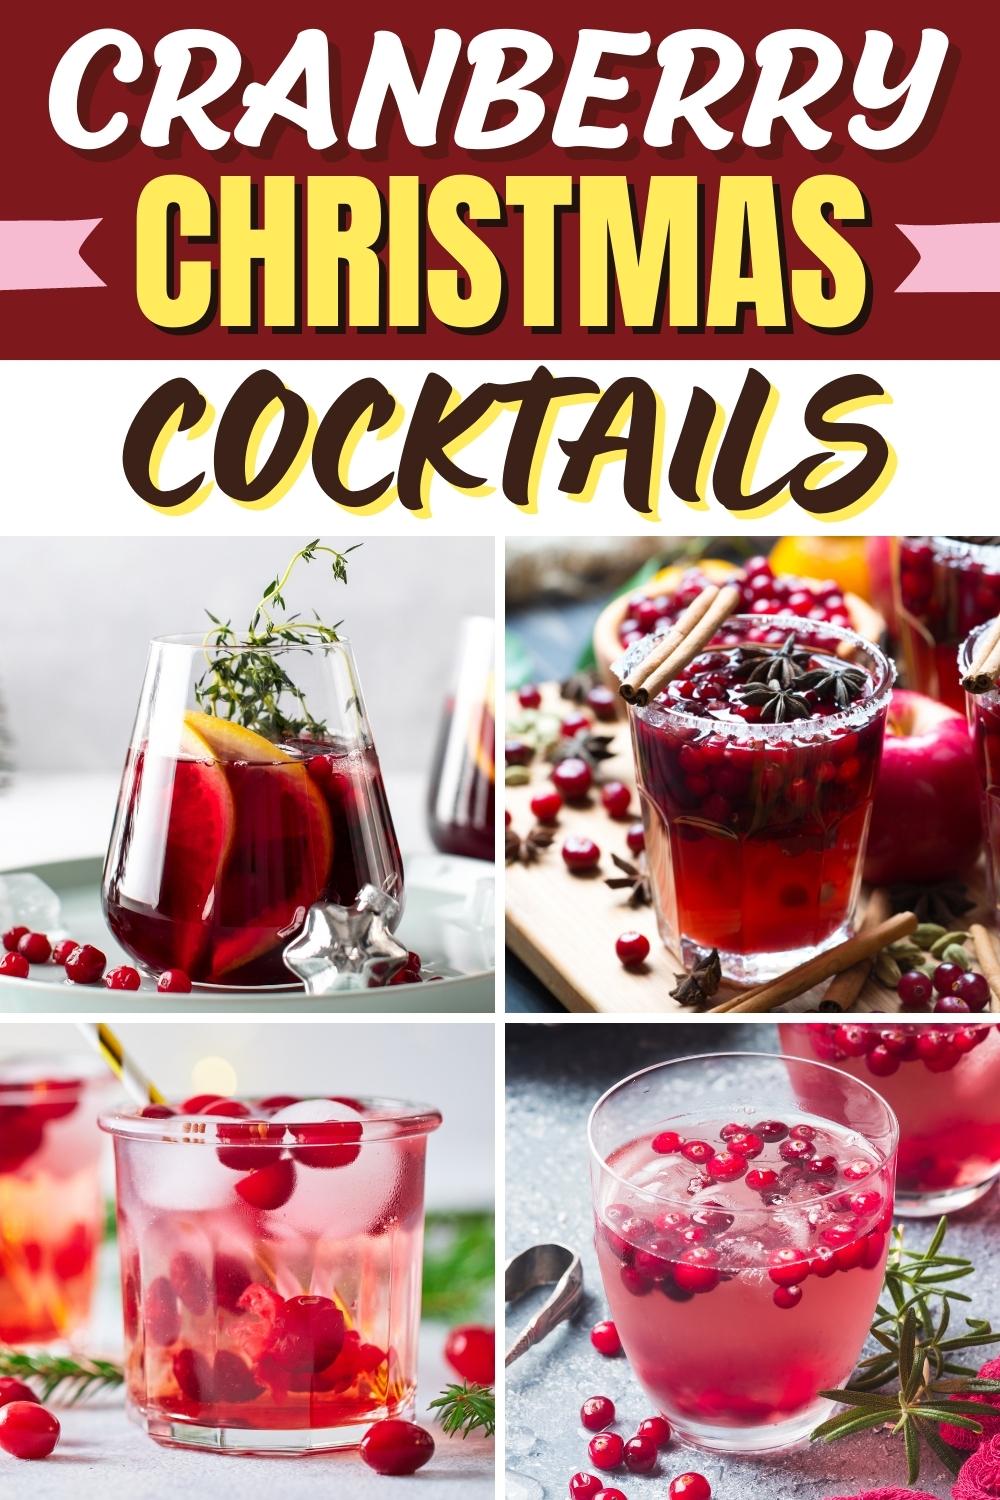 23 Easy Cranberry Christmas Cocktails for the Holidays - Insanely Good